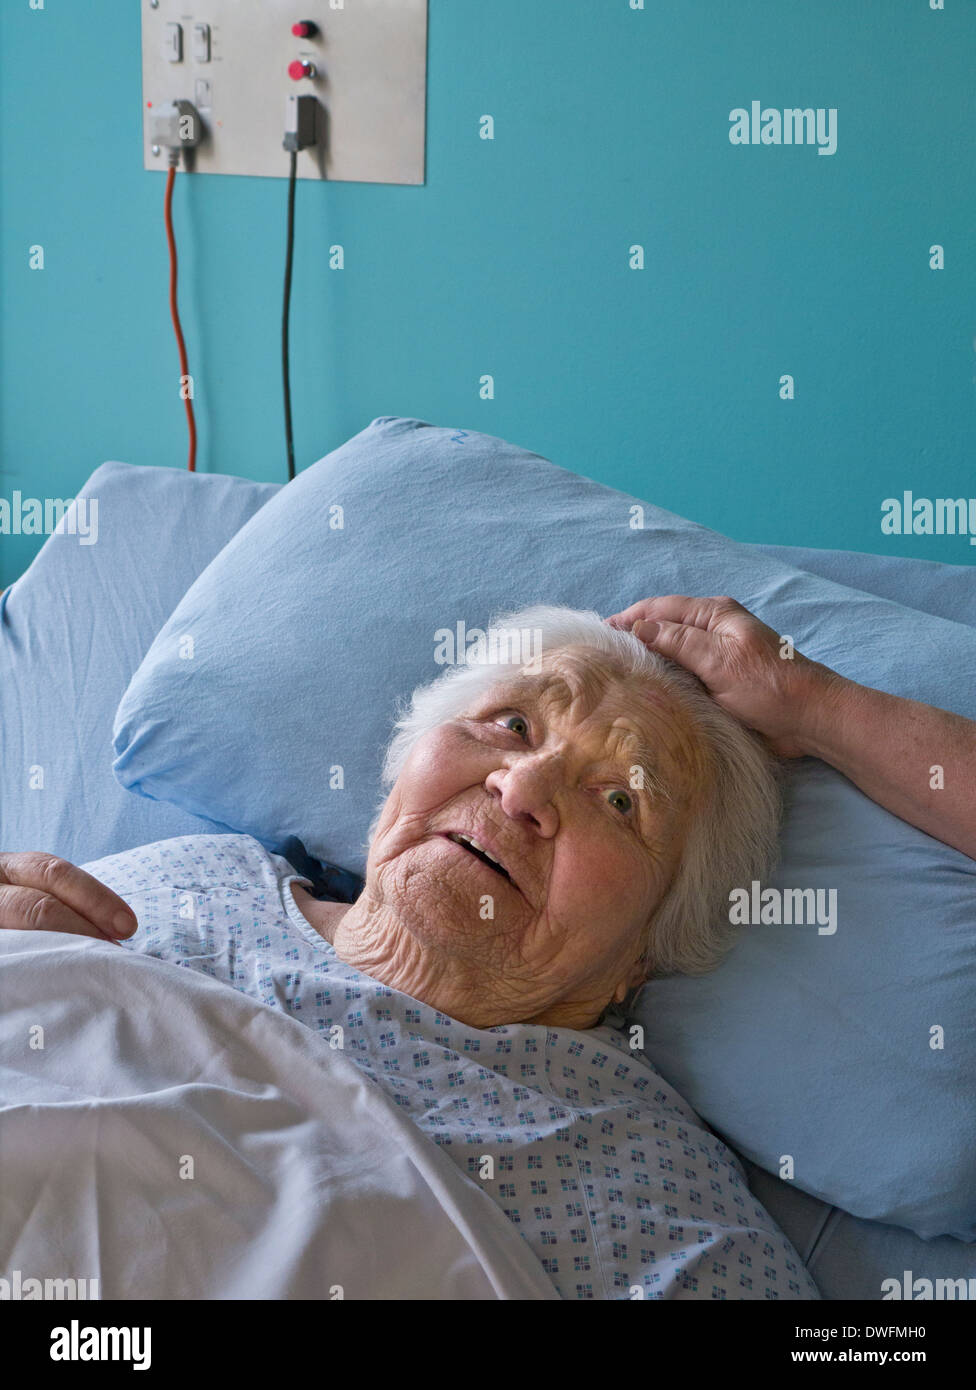 Elderly old lady hospital care bed contented & cared for, secure smiling senior old age woman with comforting touching hand of visiting carer nurse Stock Photo